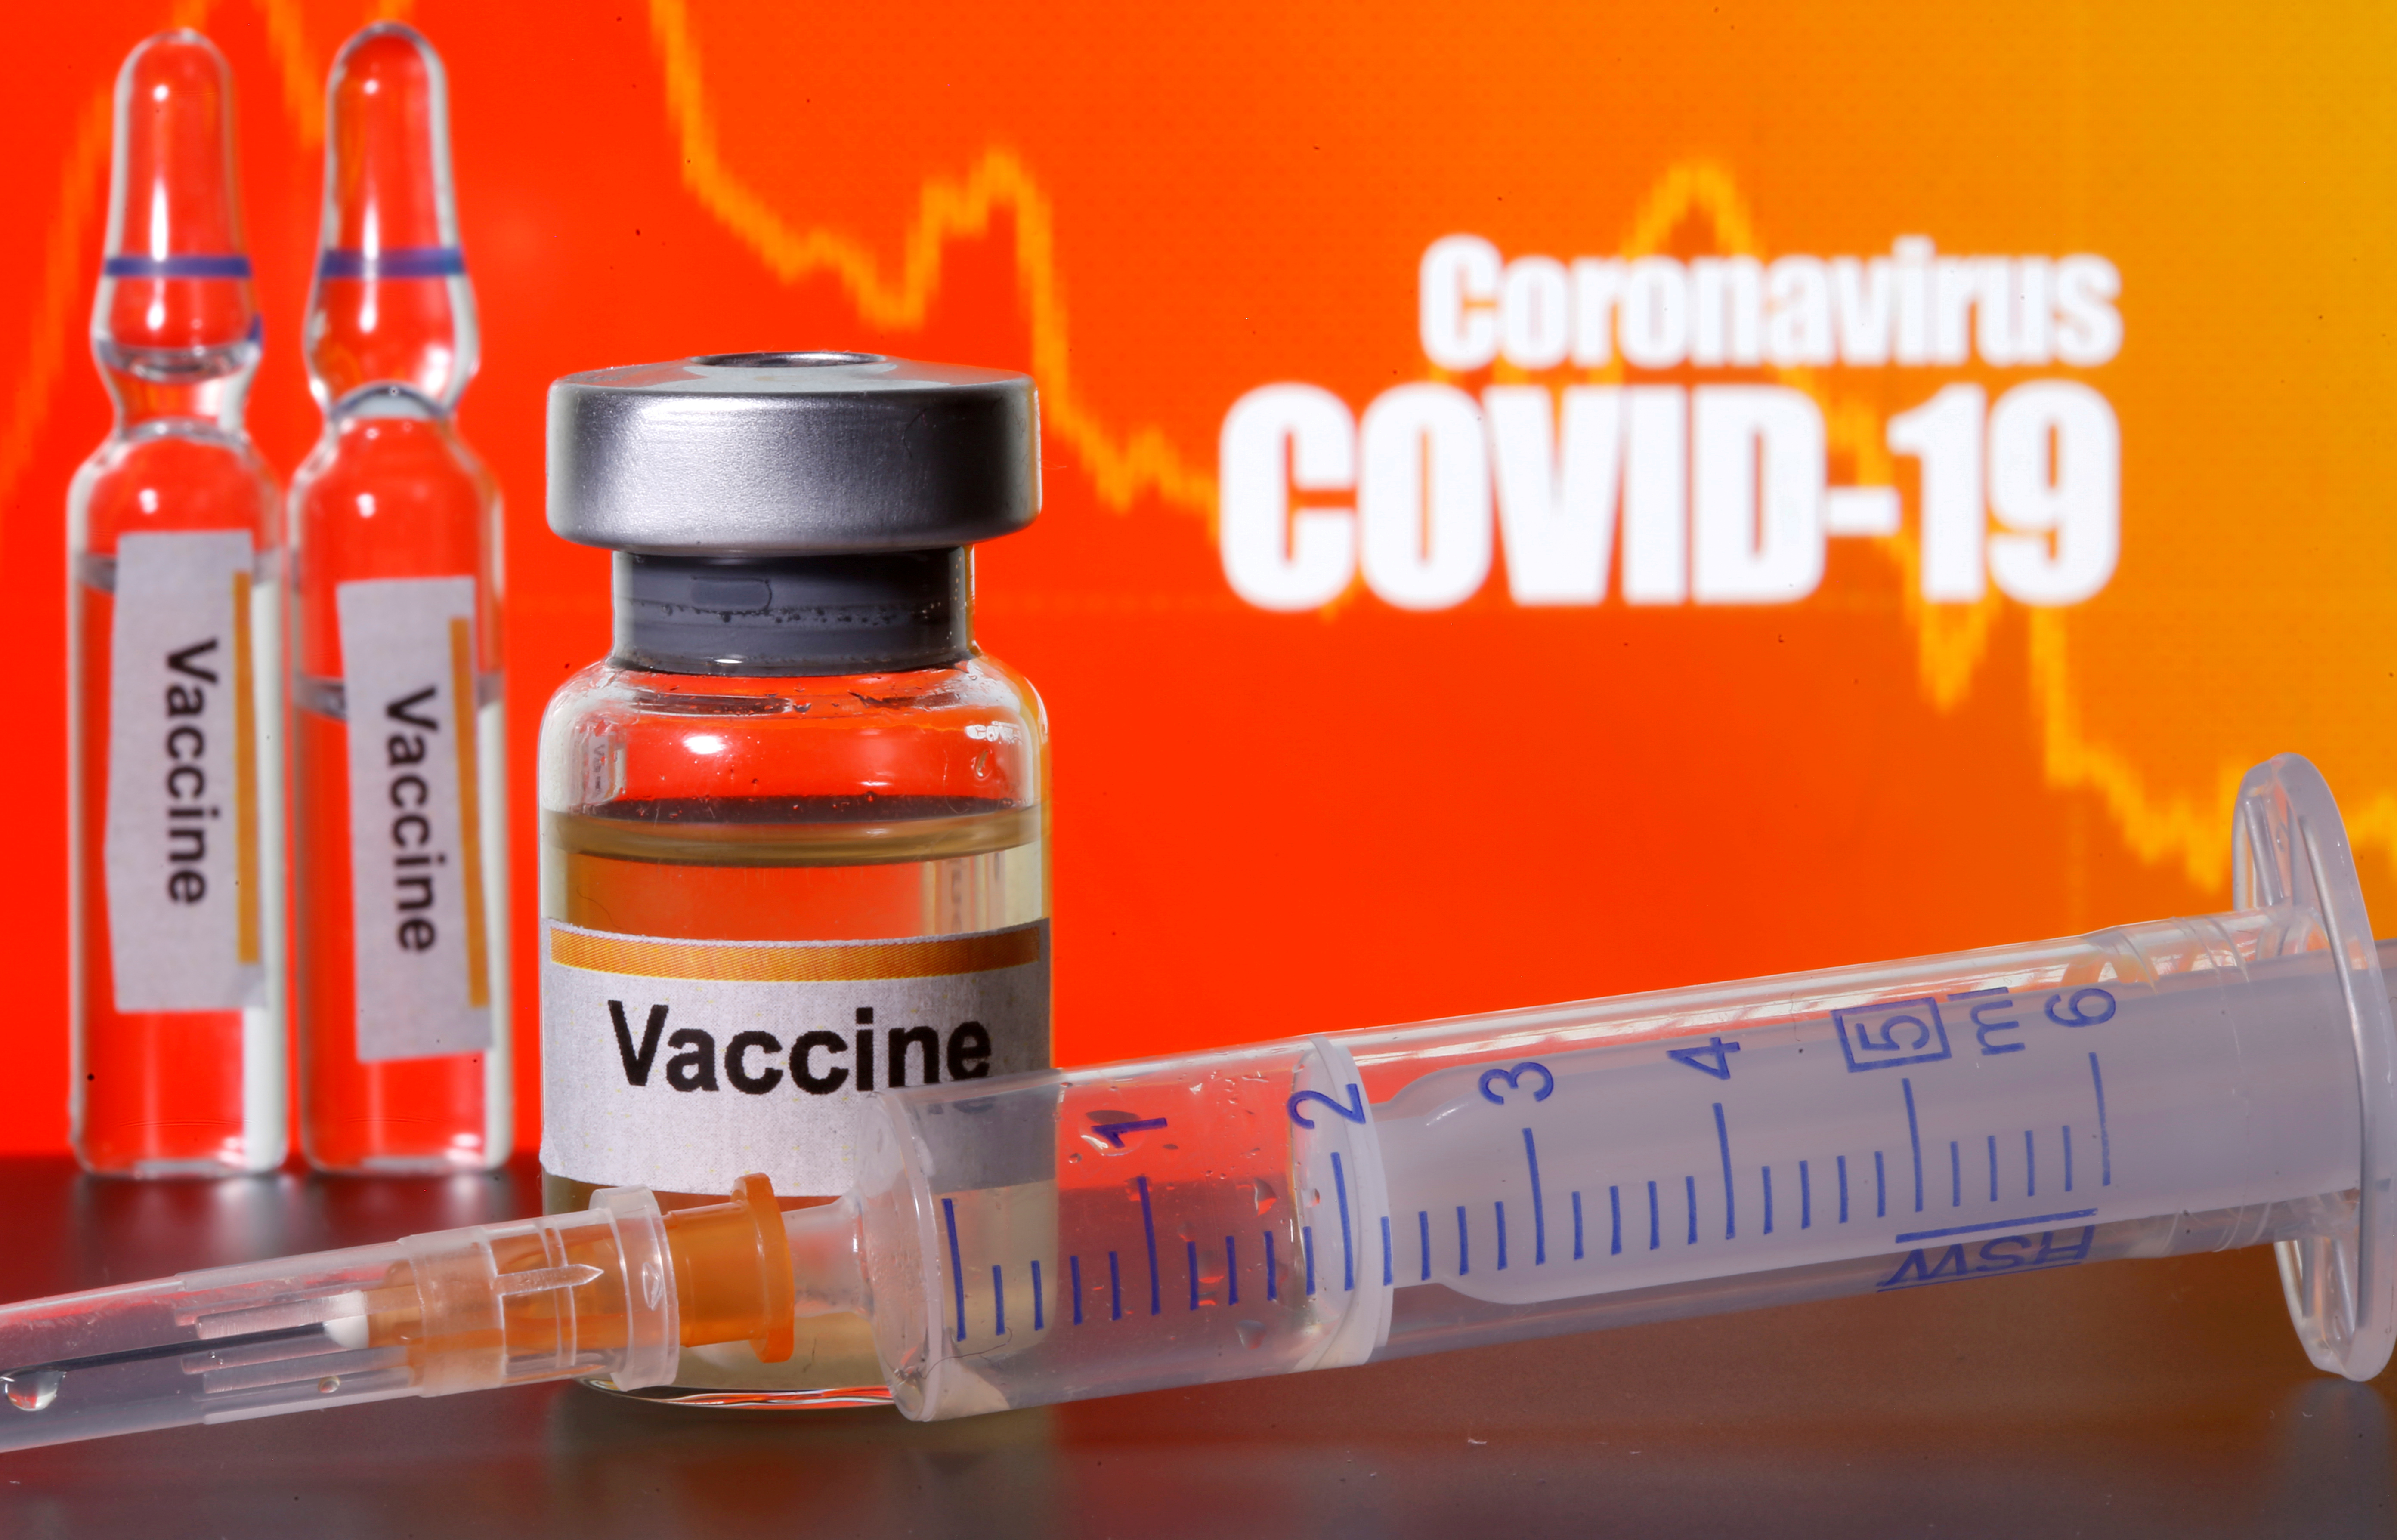 FILE PHOTO: Small bottles labeled with "Vaccine" stickers stand near a medical syringe in front of displayed "Coronavirus COVID-19" words in this illustration taken April 10, 2020. REUTERS/Dado Ruvic/Illustration/File Photo